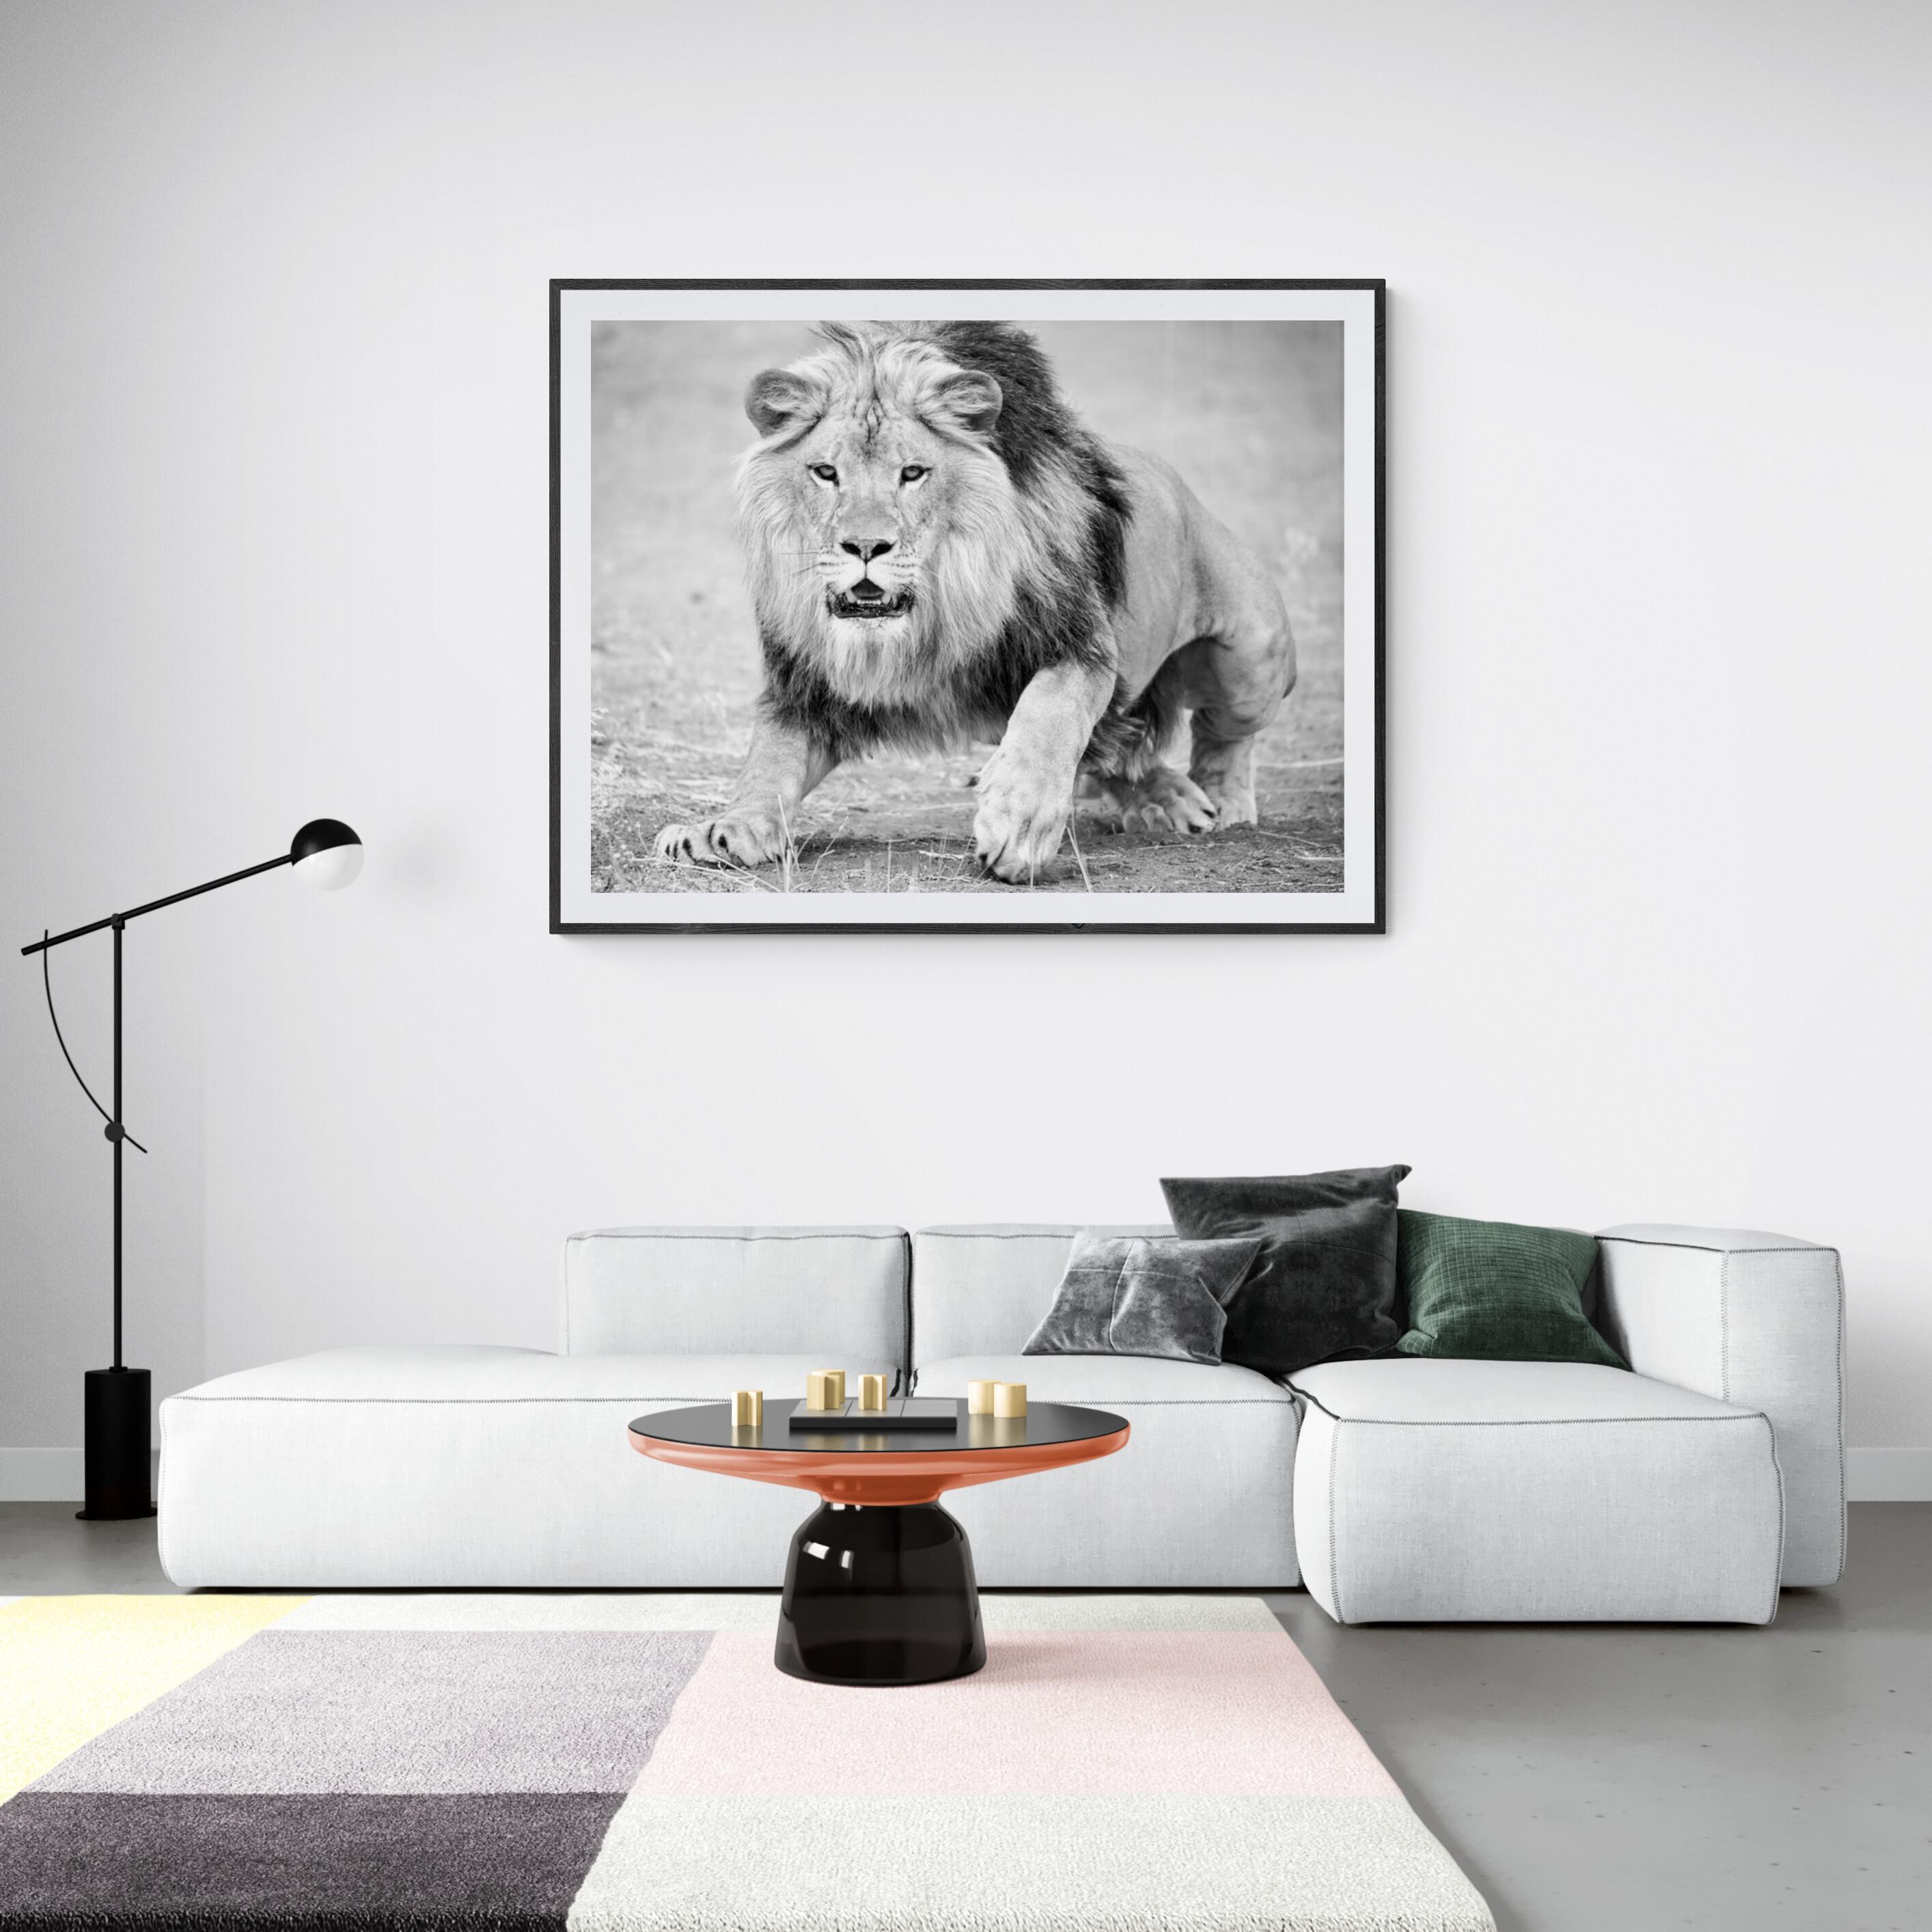 This is a contemporary photograph of an African Lion. 
50x60 
Printed on archival paper and using archival inks
Framing available. Inquire for rates. 


Shane Russeck has built a reputation for capturing America's landscapes, cultures and endangered